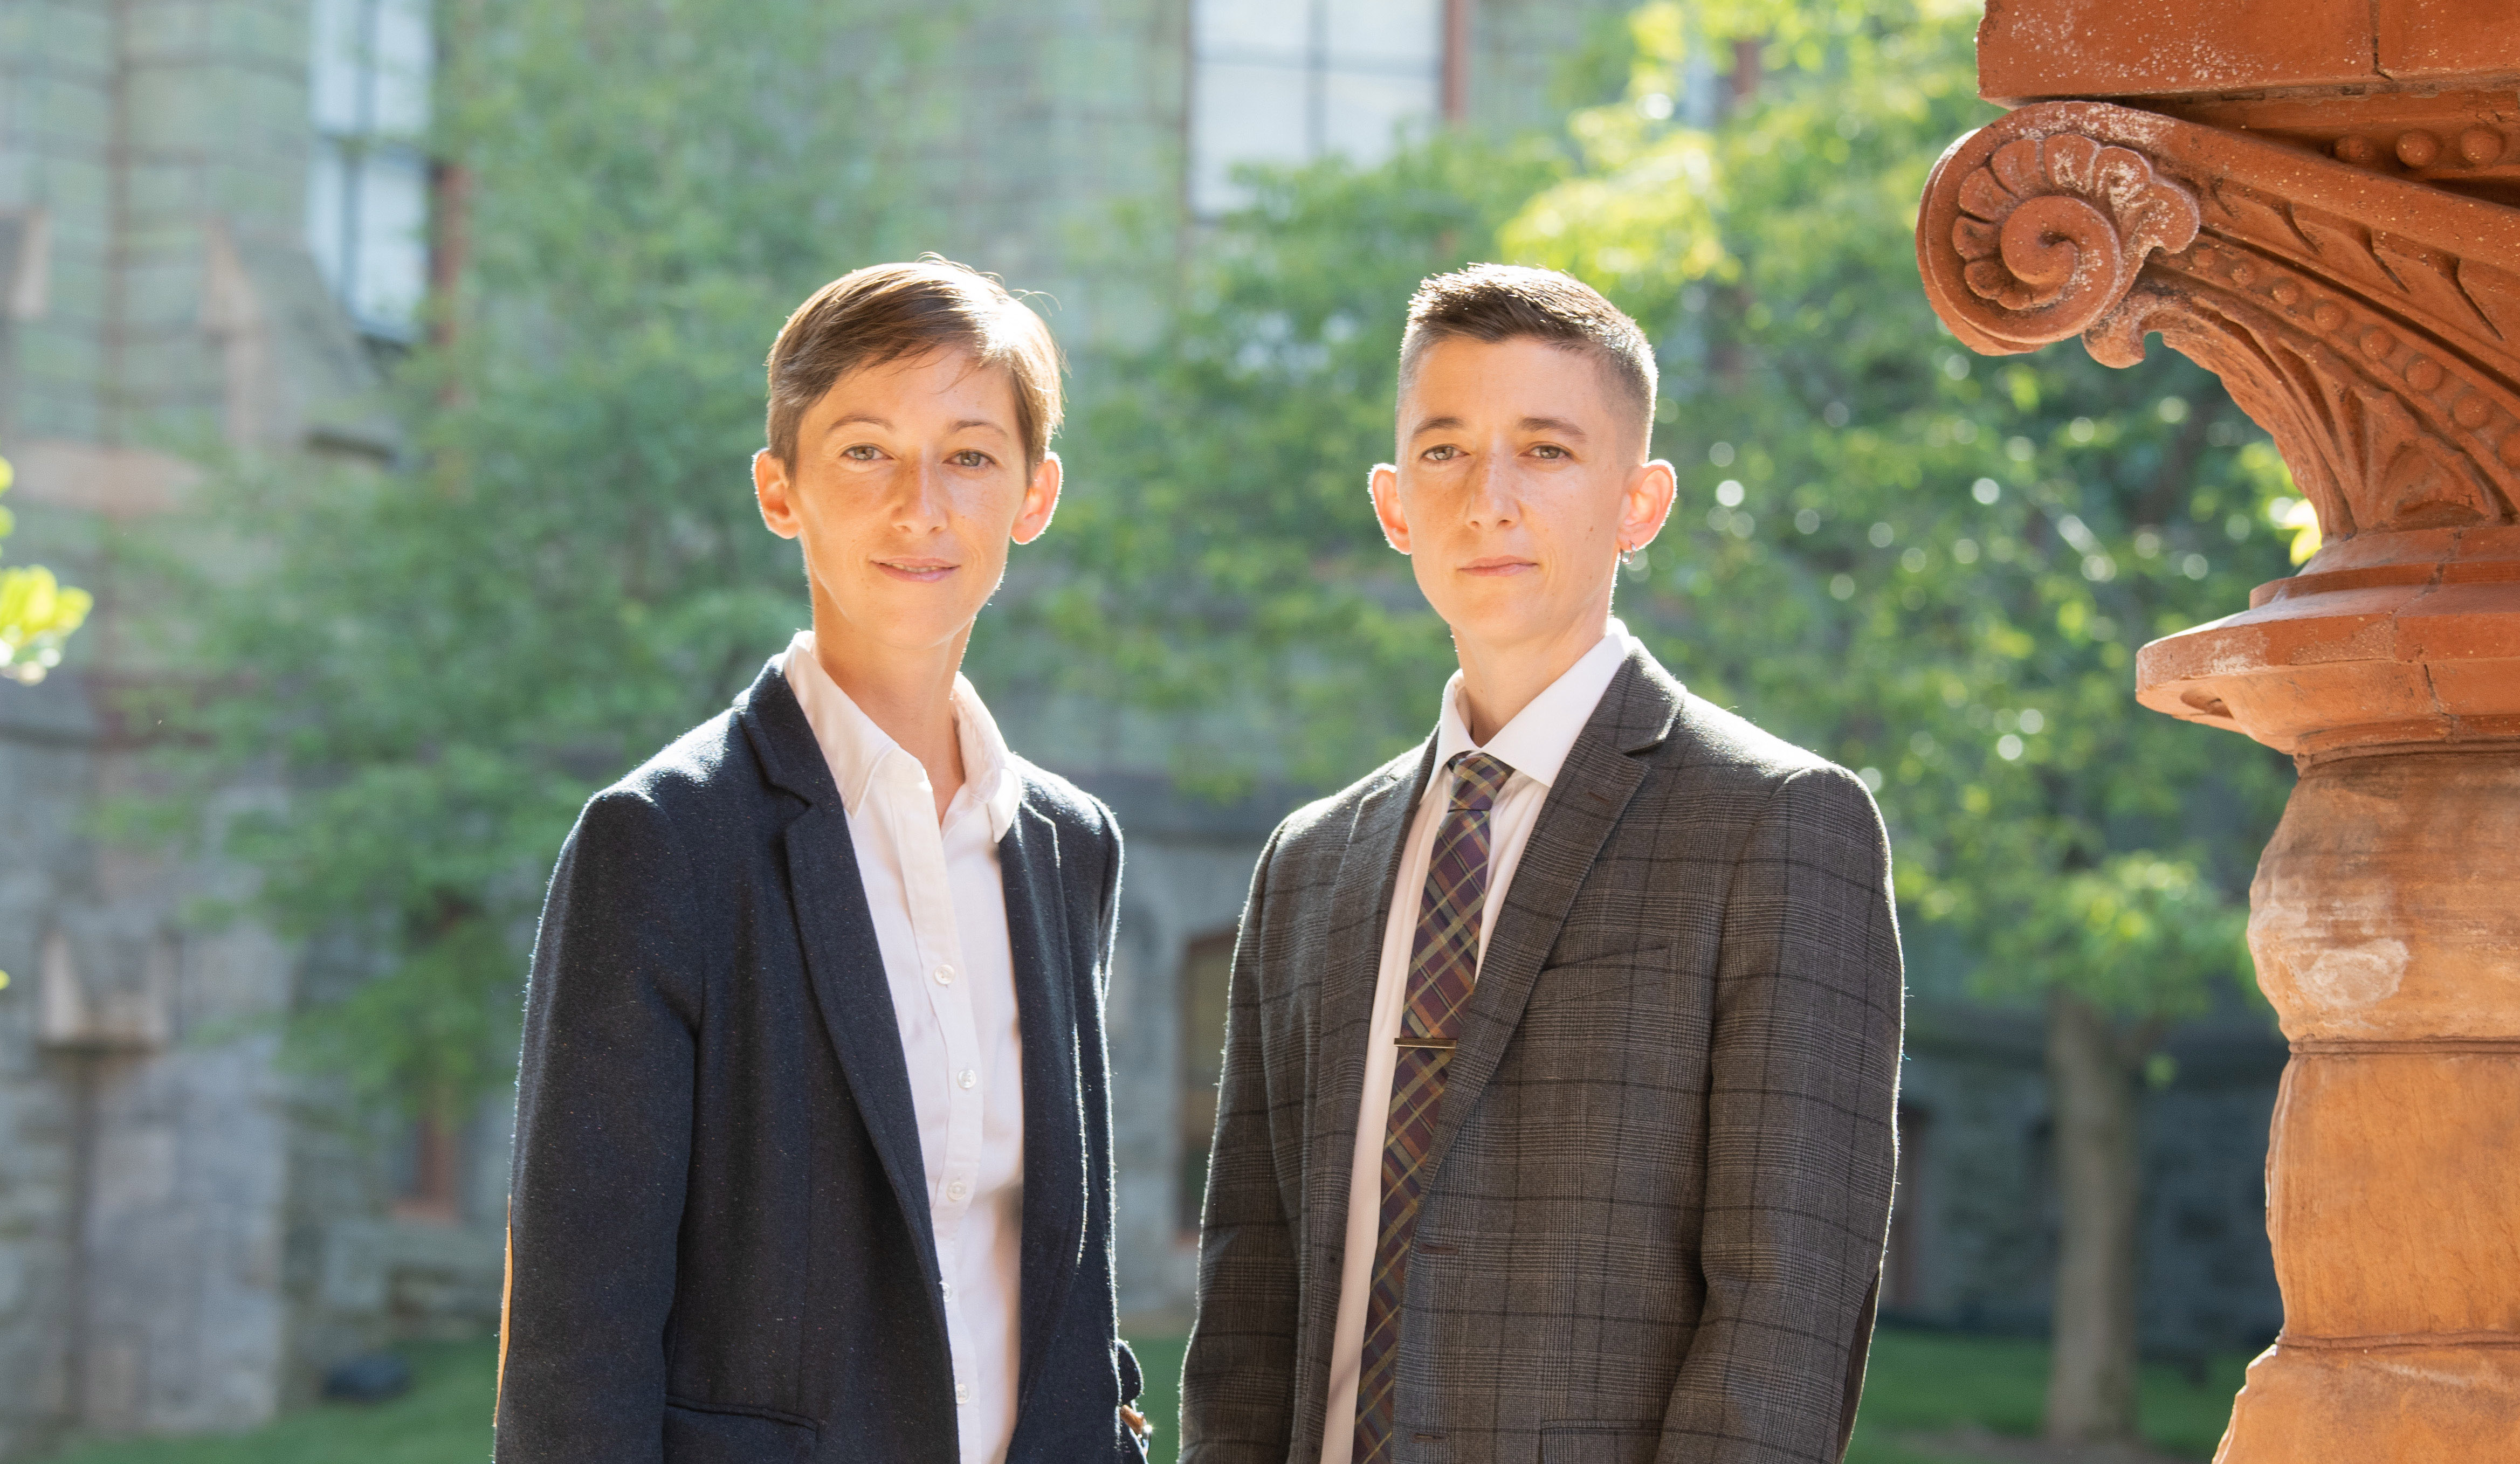 Twin siblings and scholars Dani S. Bassett and Perry Zurn